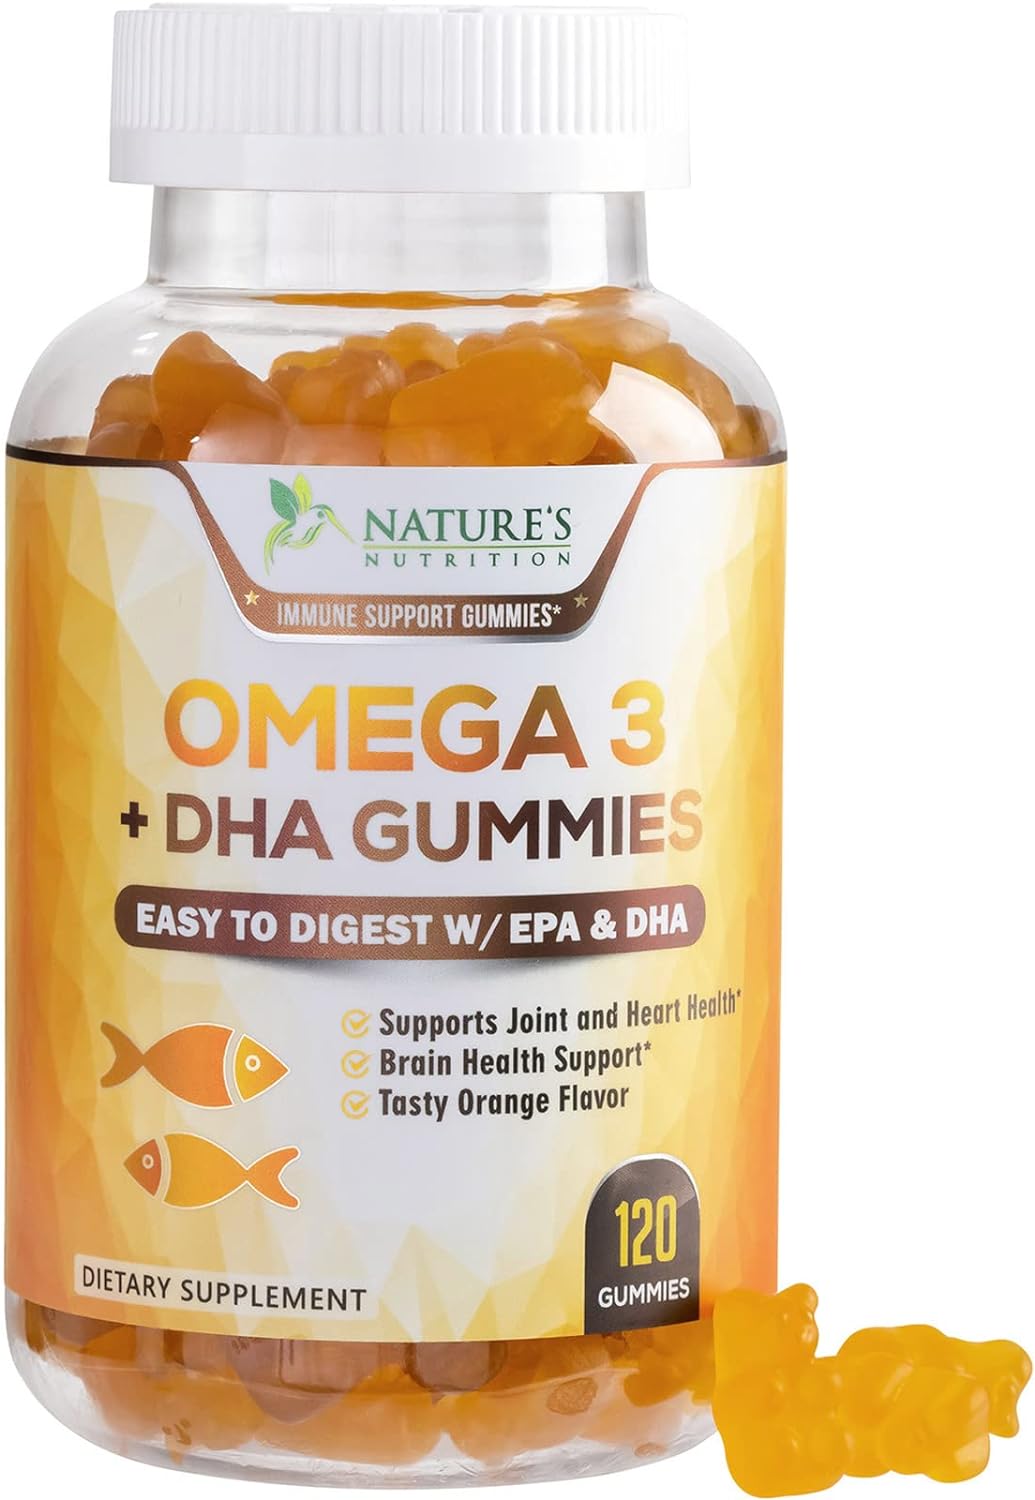 Natures Nutrition Omega 3 Fish Oil Gummies, Heart Healthy Omega 3s with DHA & EPA, Tasty Natural Orange Flavor, Extra Strength Brain Support and Joints Support, Delicious Gummy Vitamin for Men & Wom